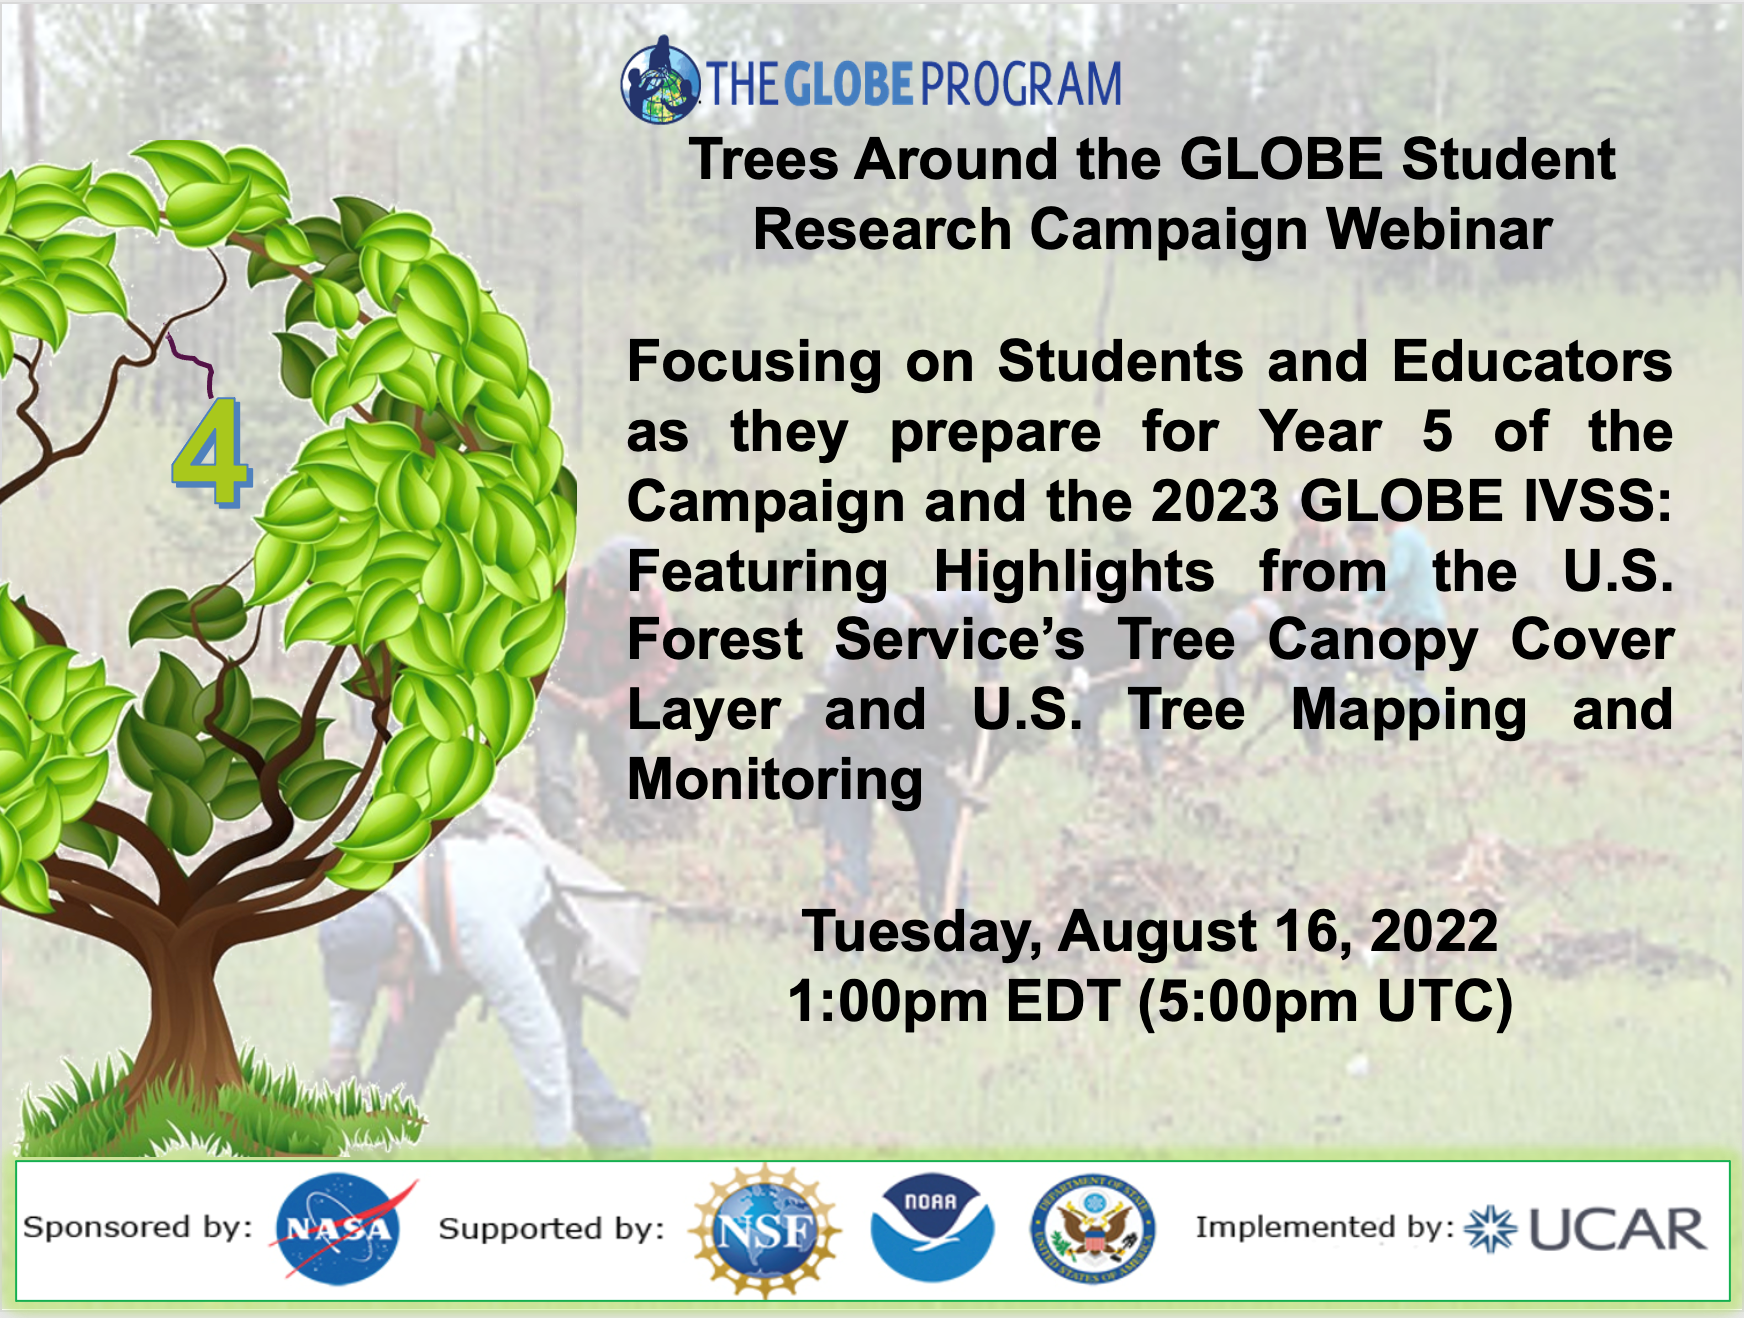 Trees Around the GLOBE Student Research Campaign 16 August webinar shareable, showing the date and title of the event